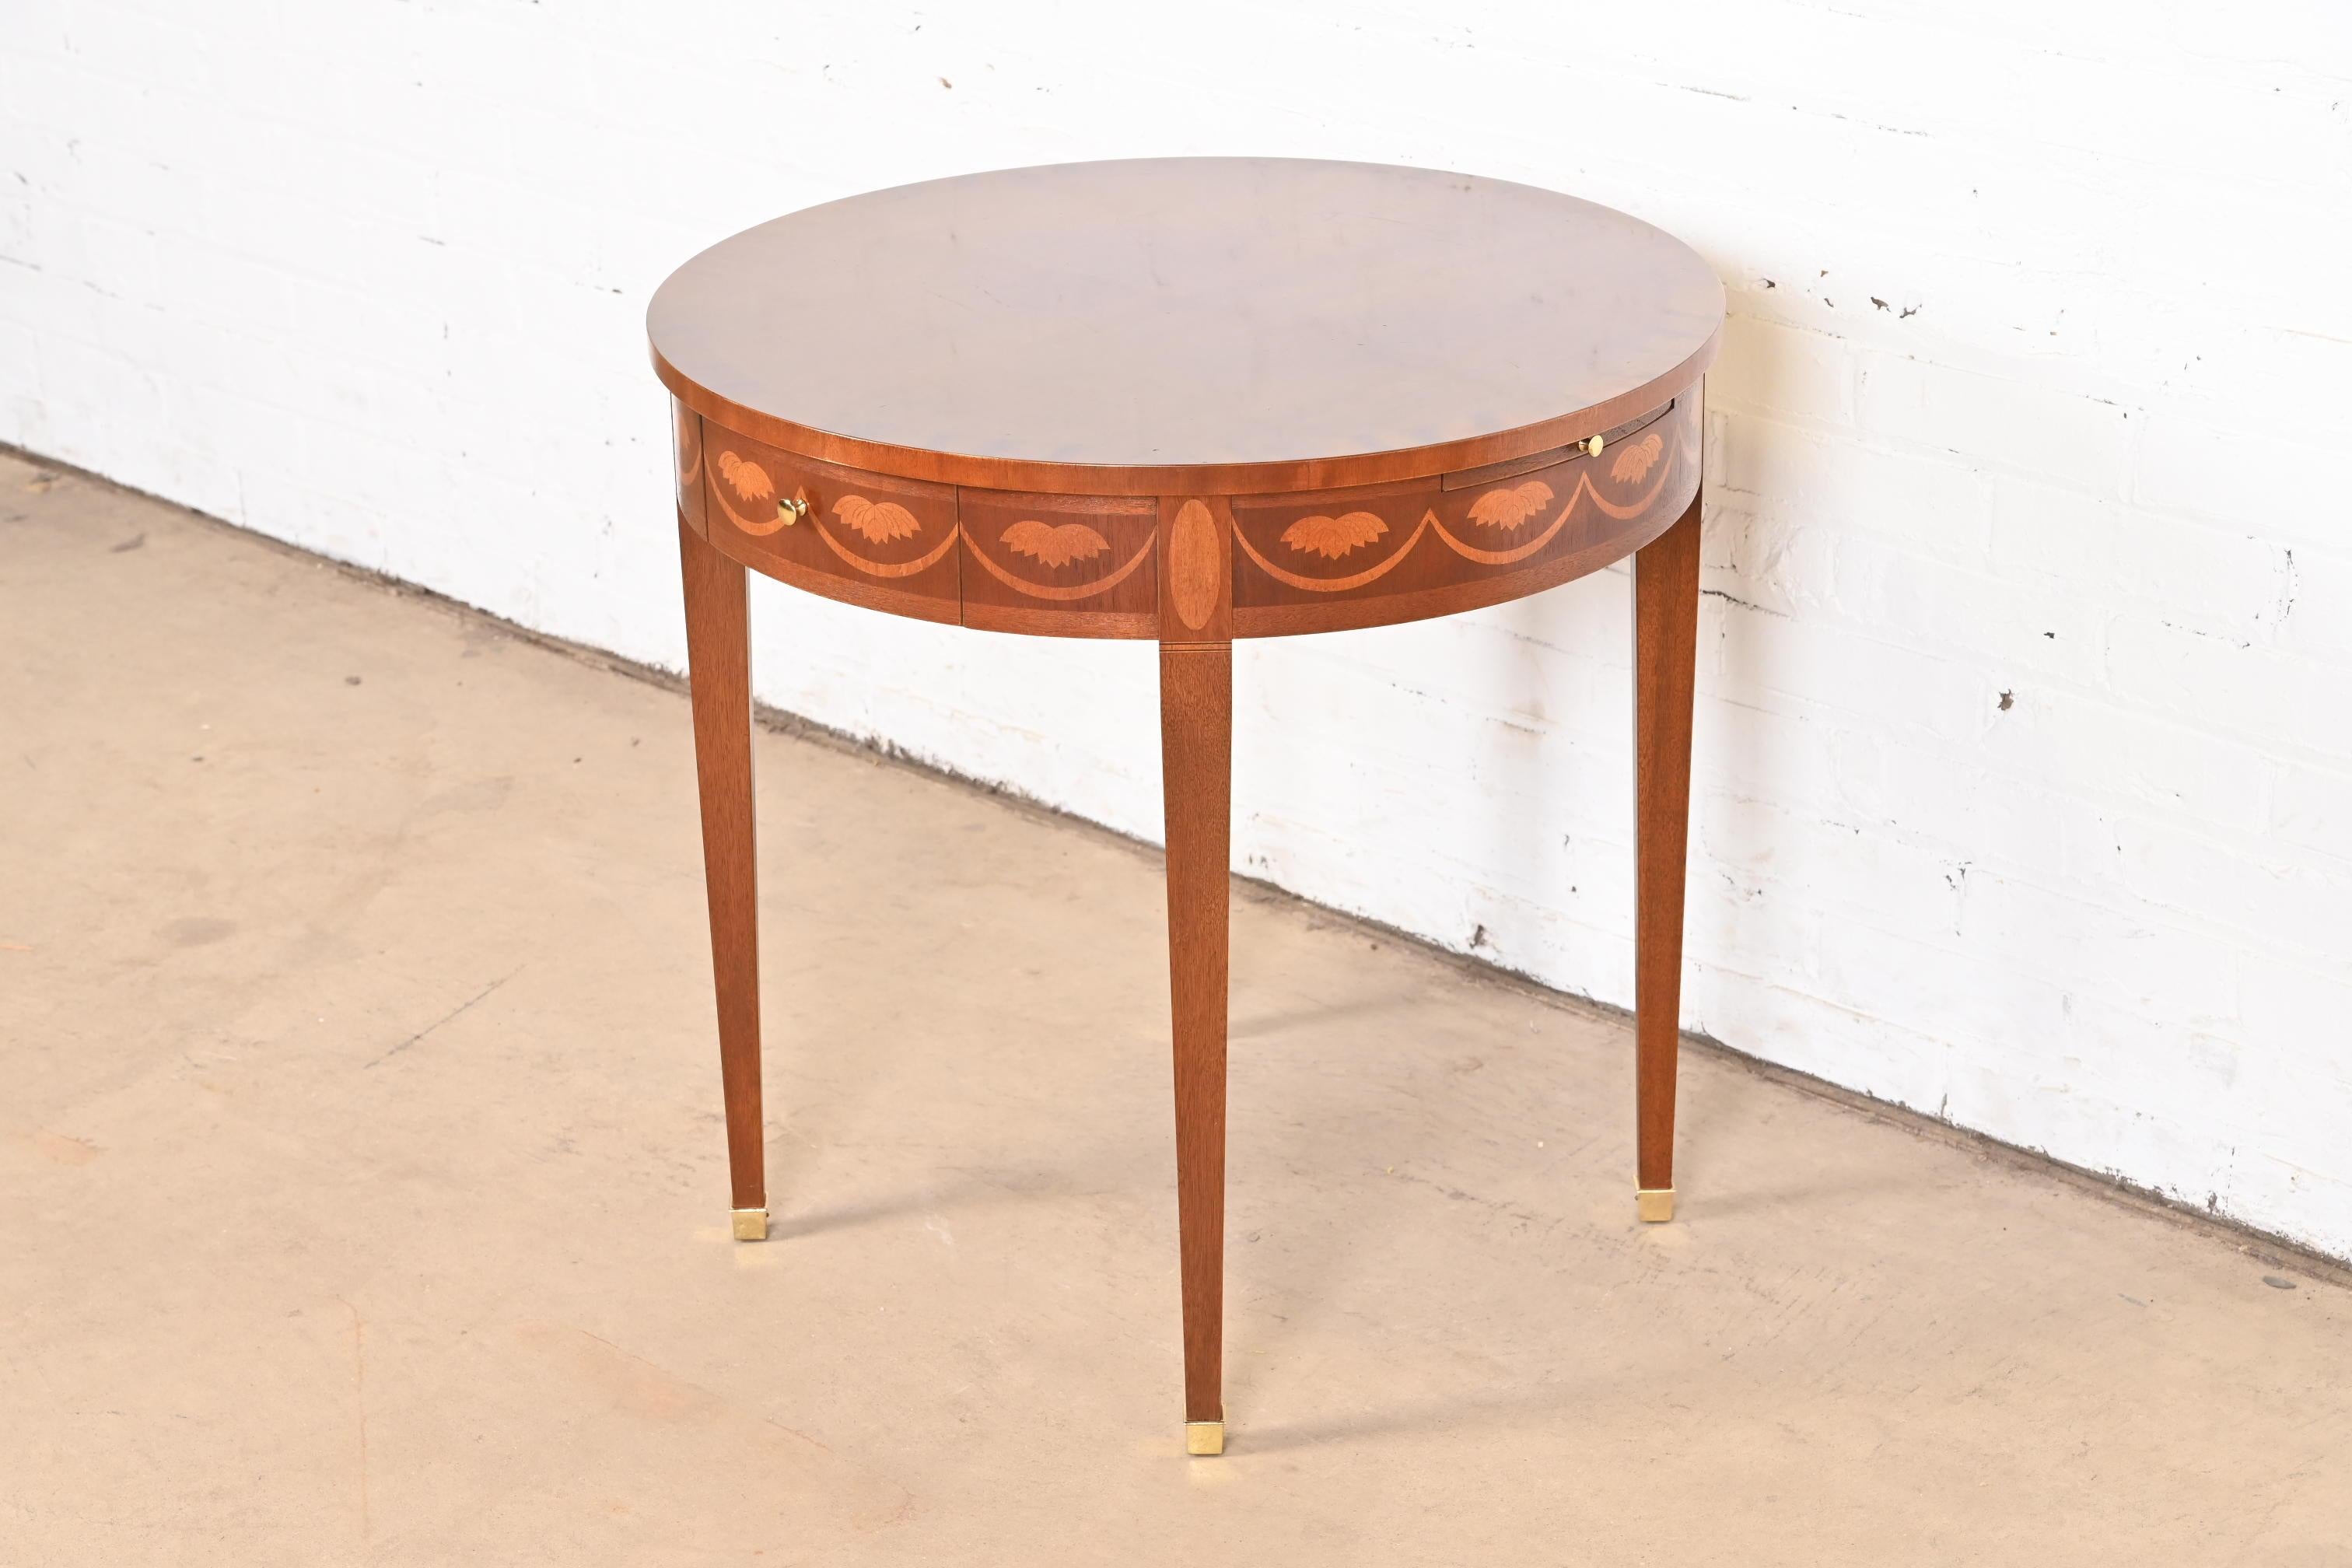 Baker Furniture Federal Inlaid Mahogany Tea Table or Occasional Side Table In Good Condition For Sale In South Bend, IN